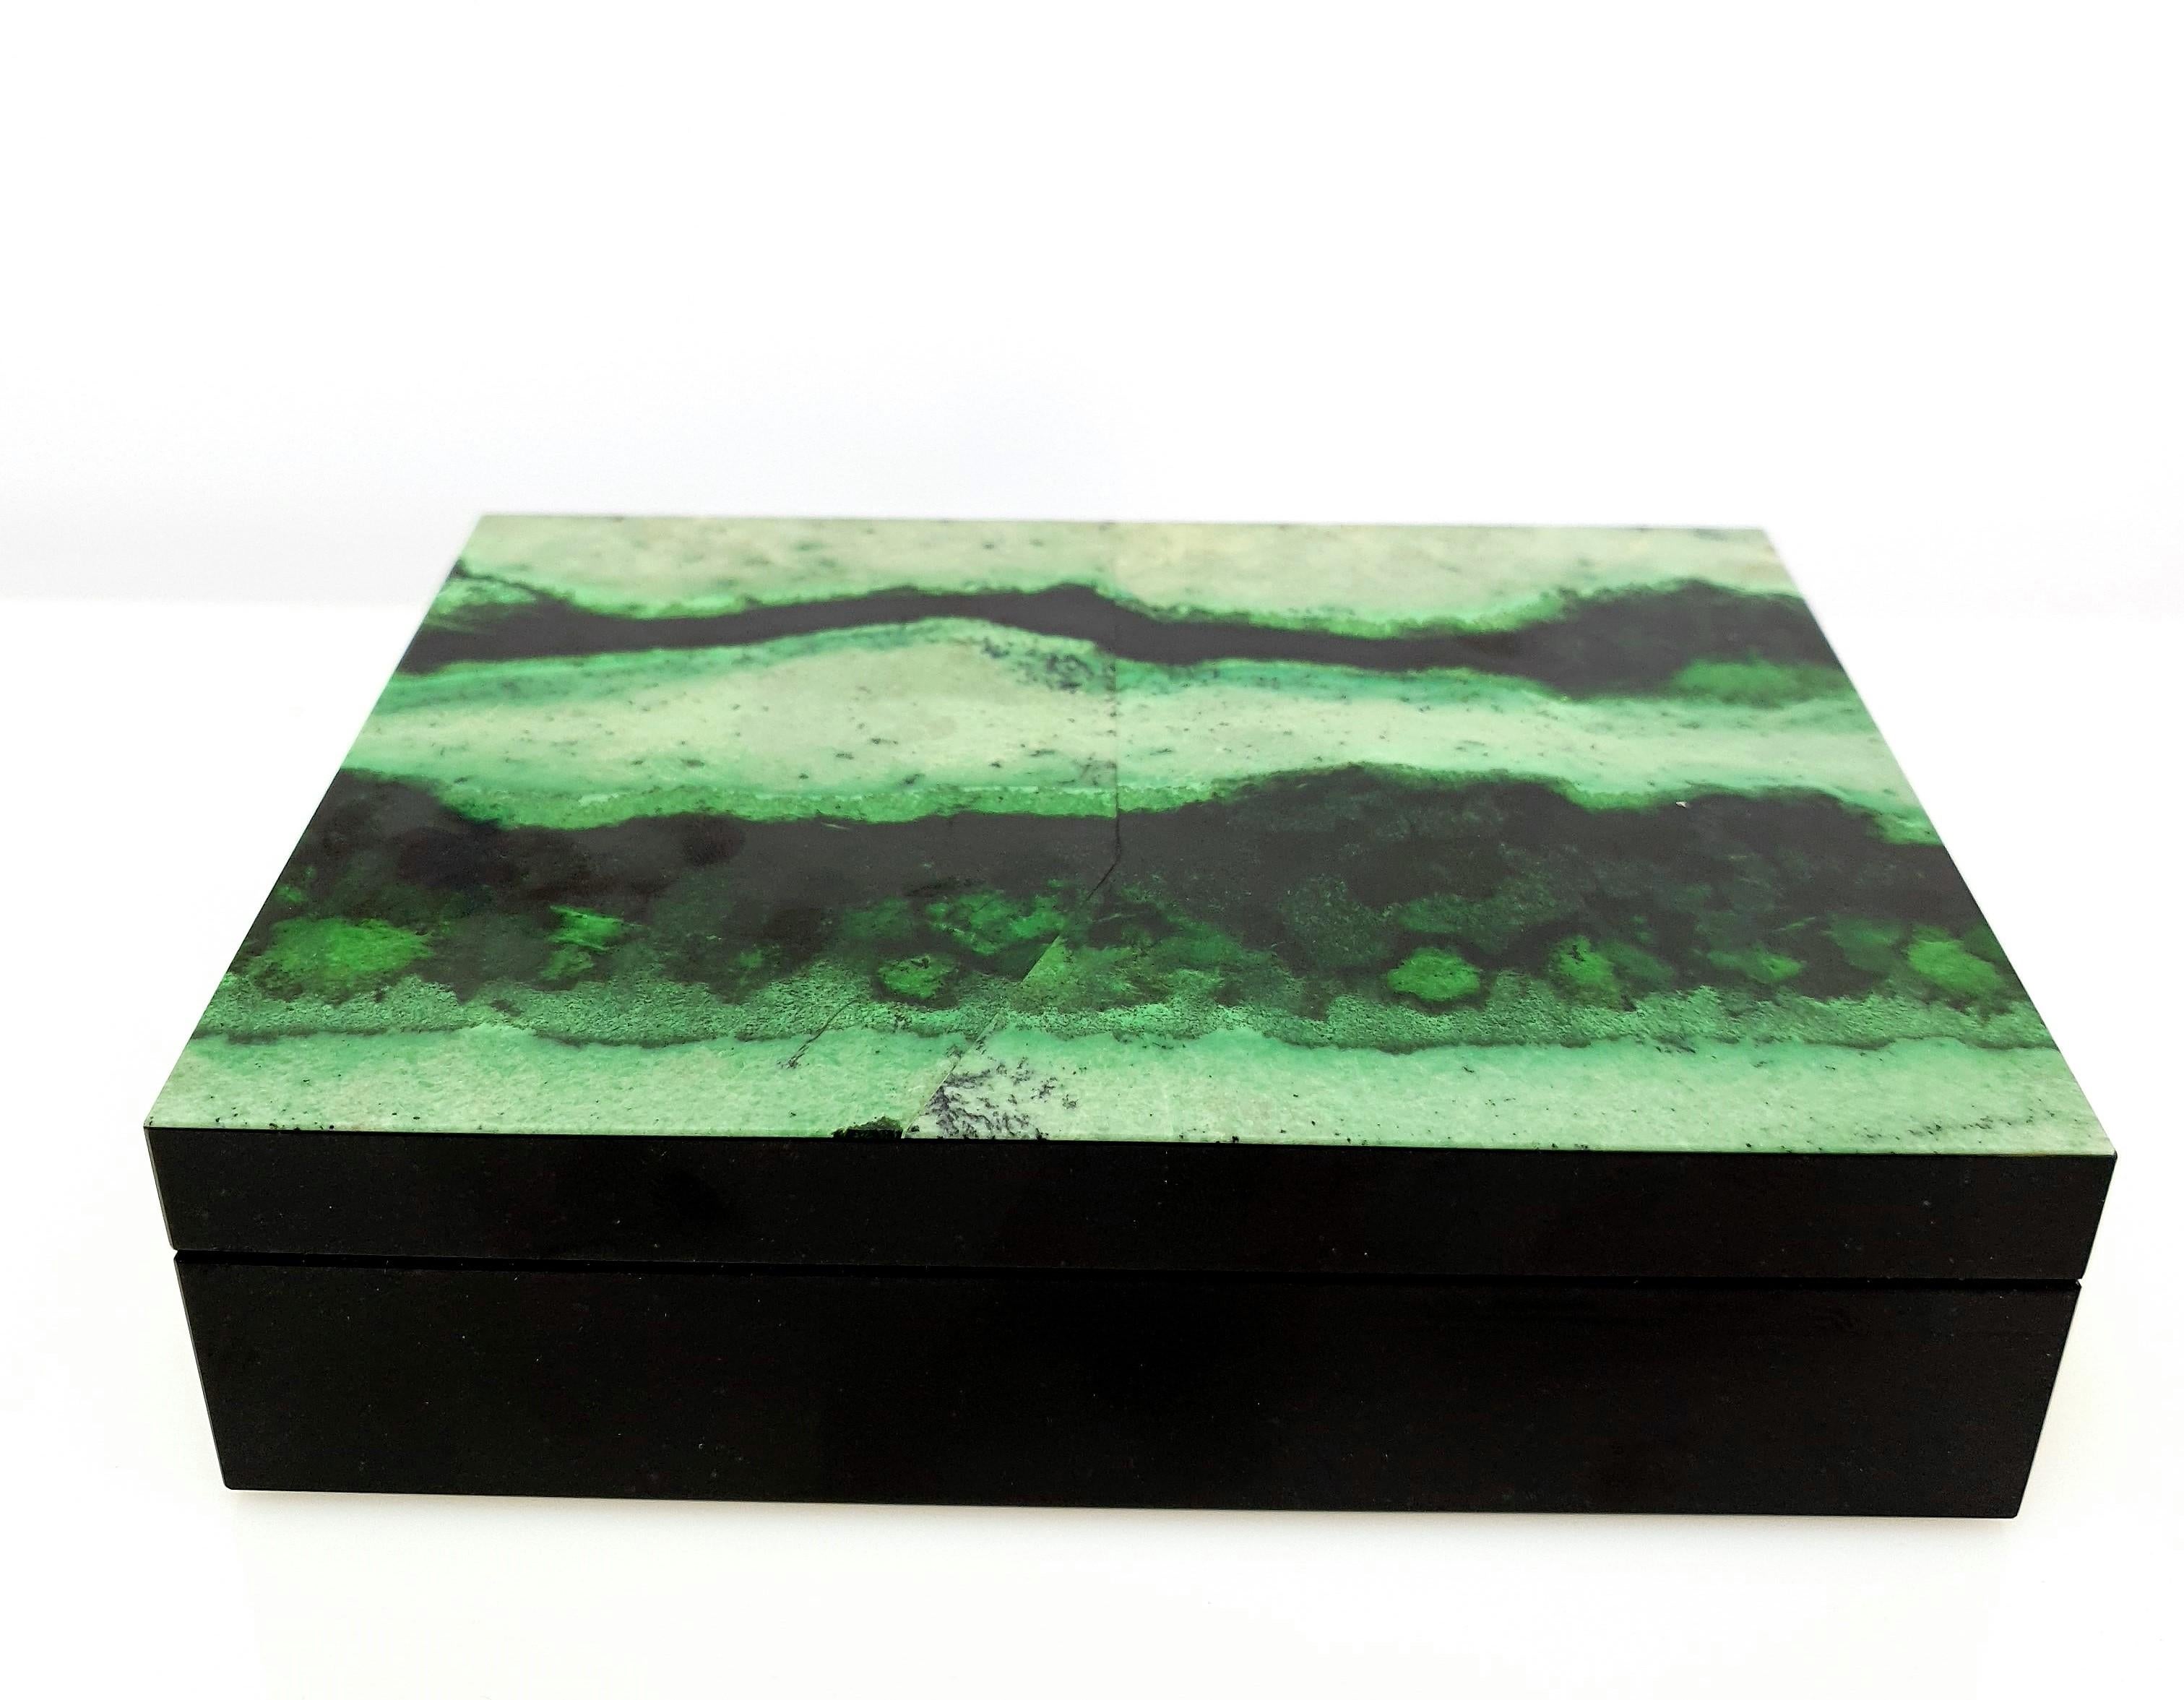 A Natural Handmade Green Garnet Grossular and Black Marble Decorative Jewelry Box.
The pattern looks like an artful painting of nature.

The Inlay is clad with cedar wood and is ideal as a cigar box.
Green Grossular belong to the Garnet family and